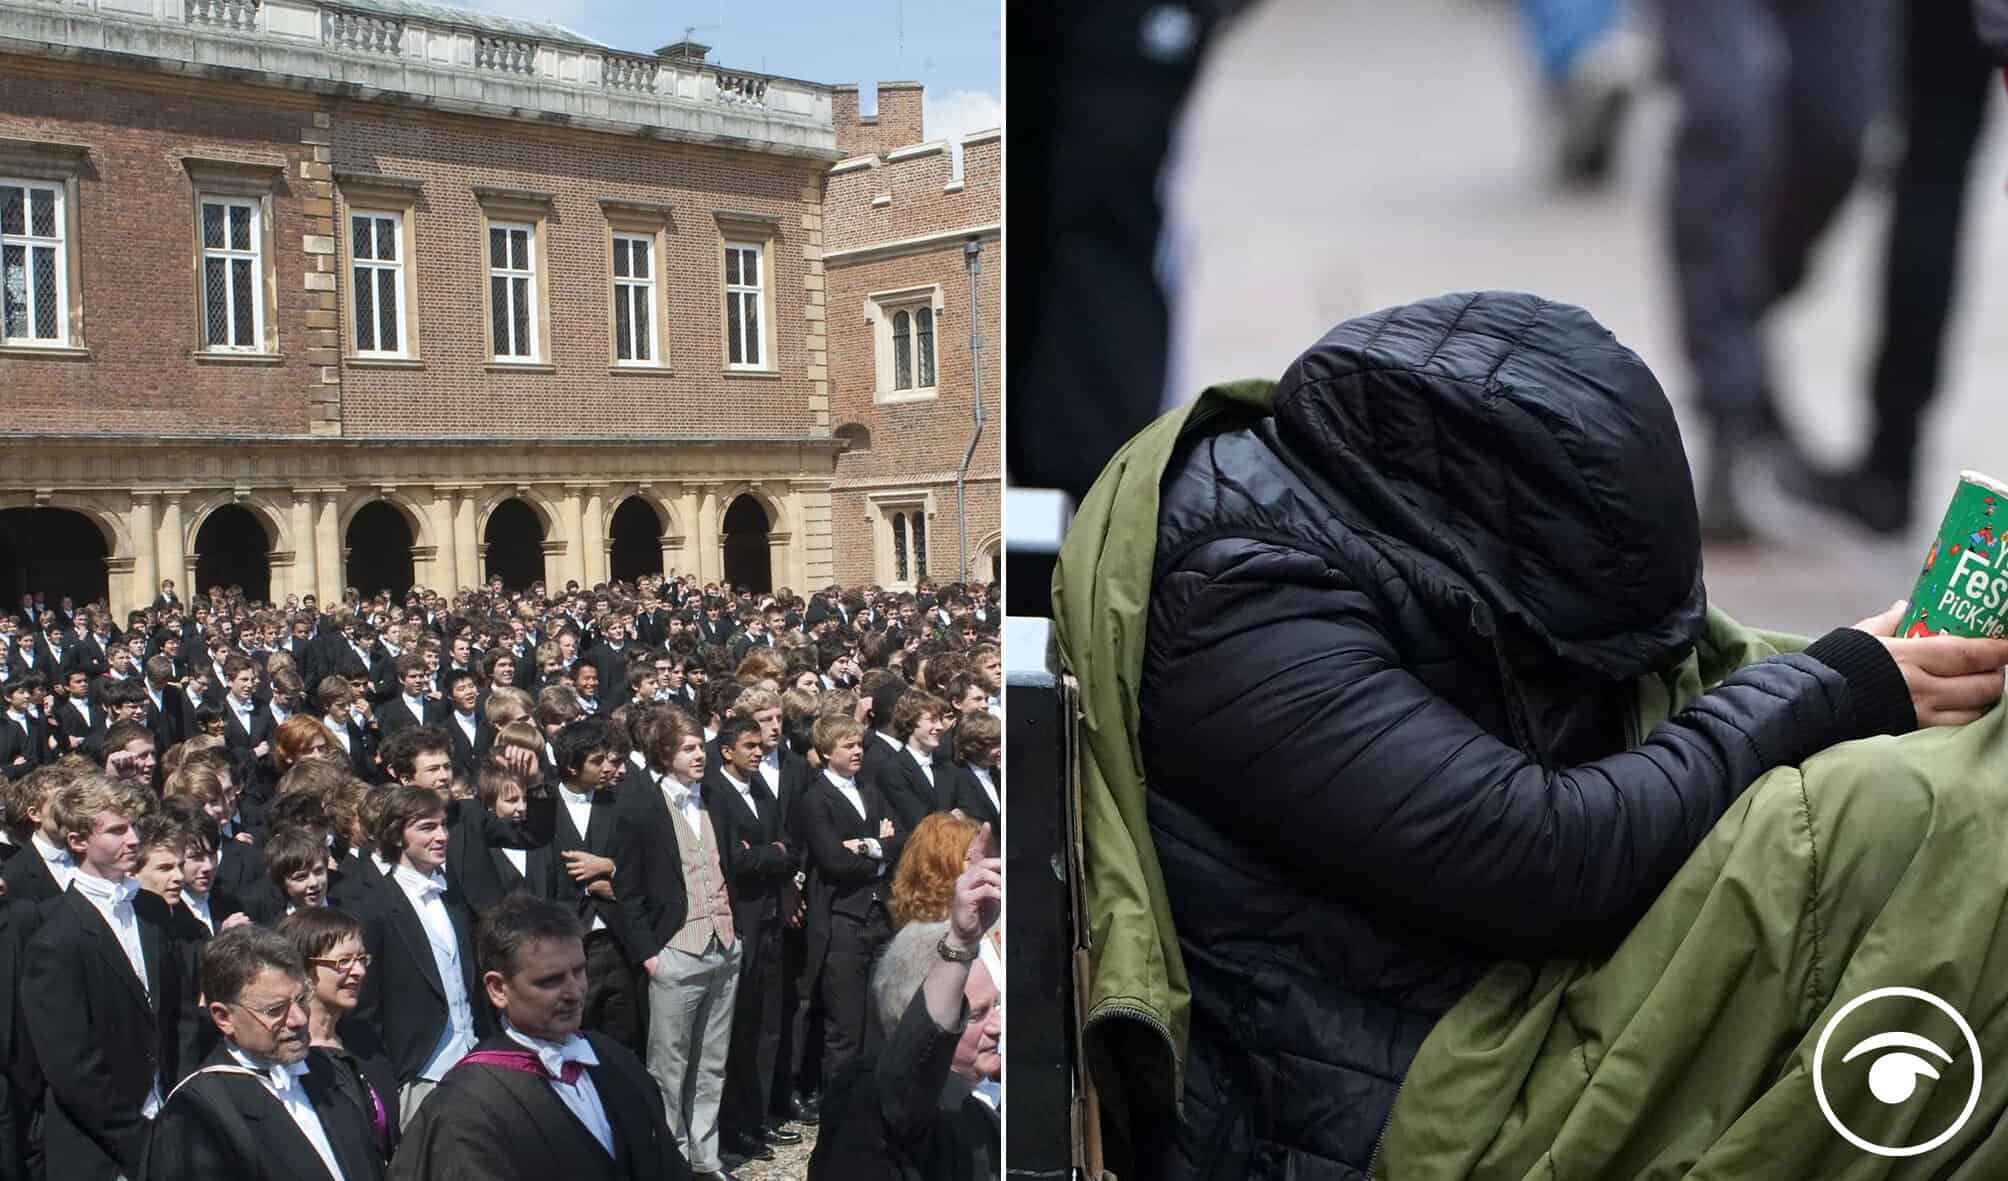 Private school pupil numbers rise to record high as three in 10 fear homelessness 